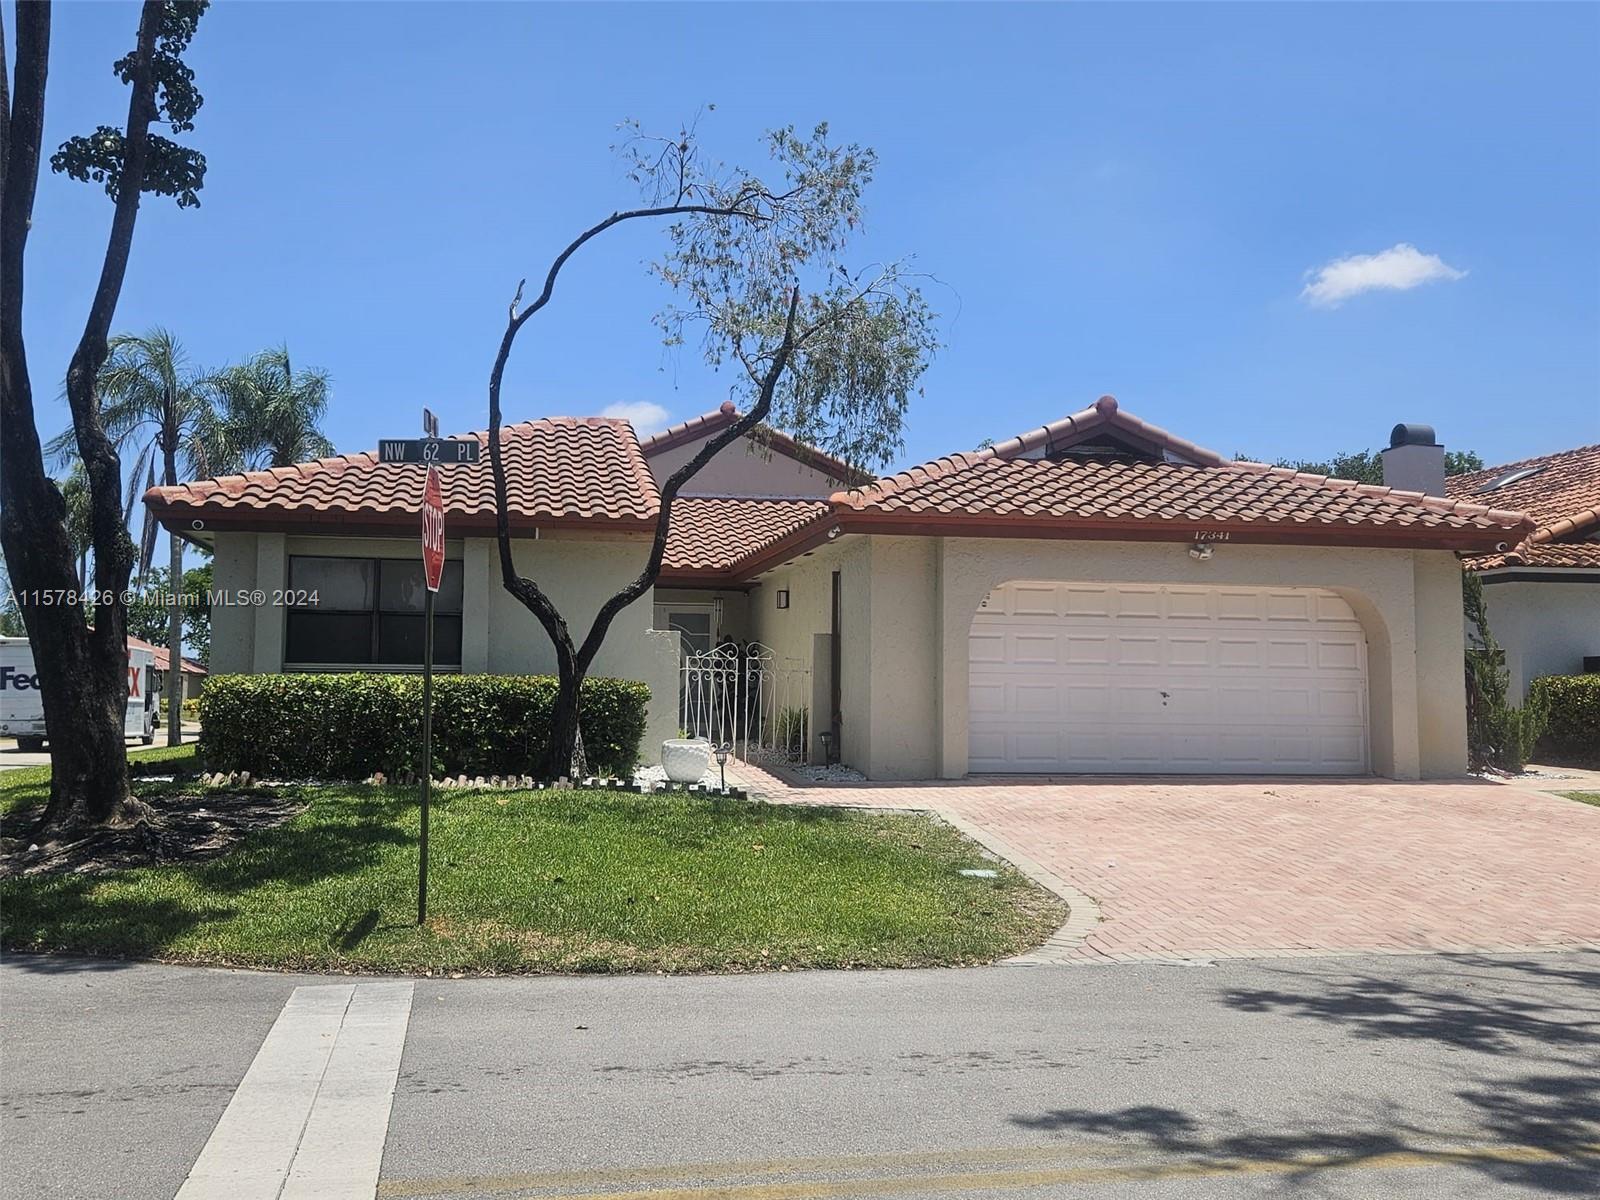 Address Not Disclosed, Hialeah, Miami-Dade County, Florida - 3 Bedrooms  
2 Bathrooms - 